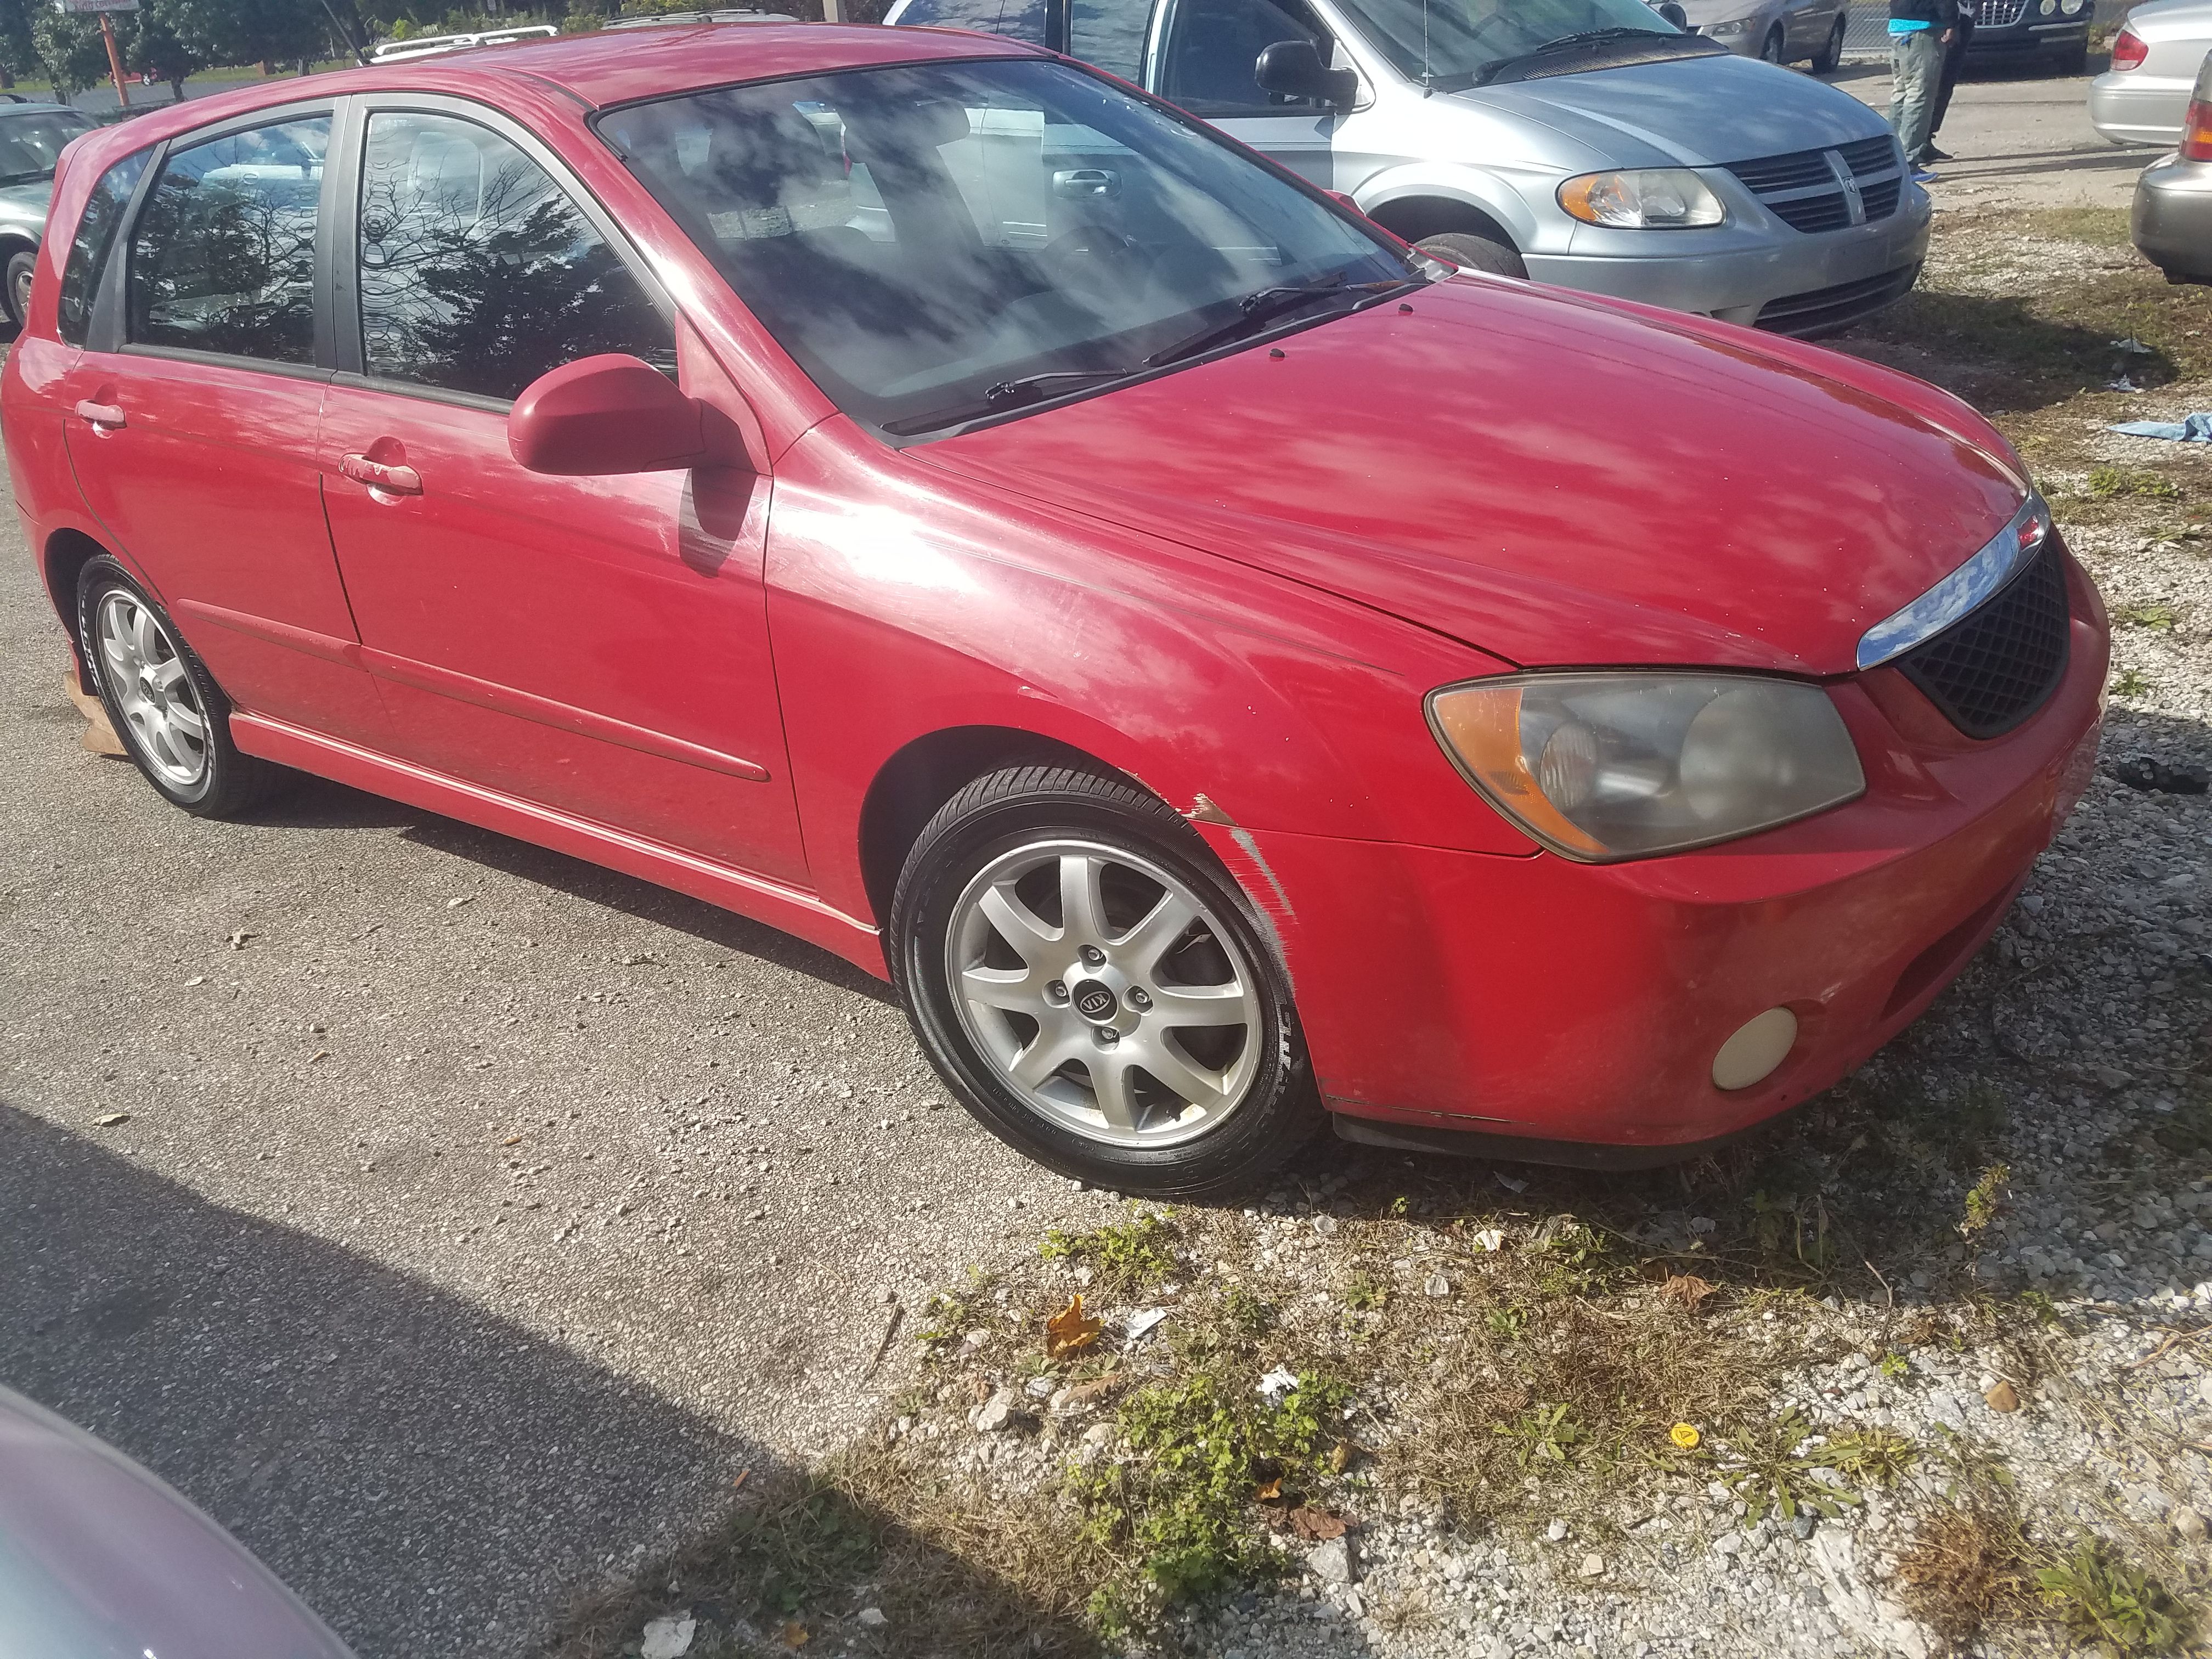 2005 Kia Spectra5 Hatchback 5speed Manual Reliable